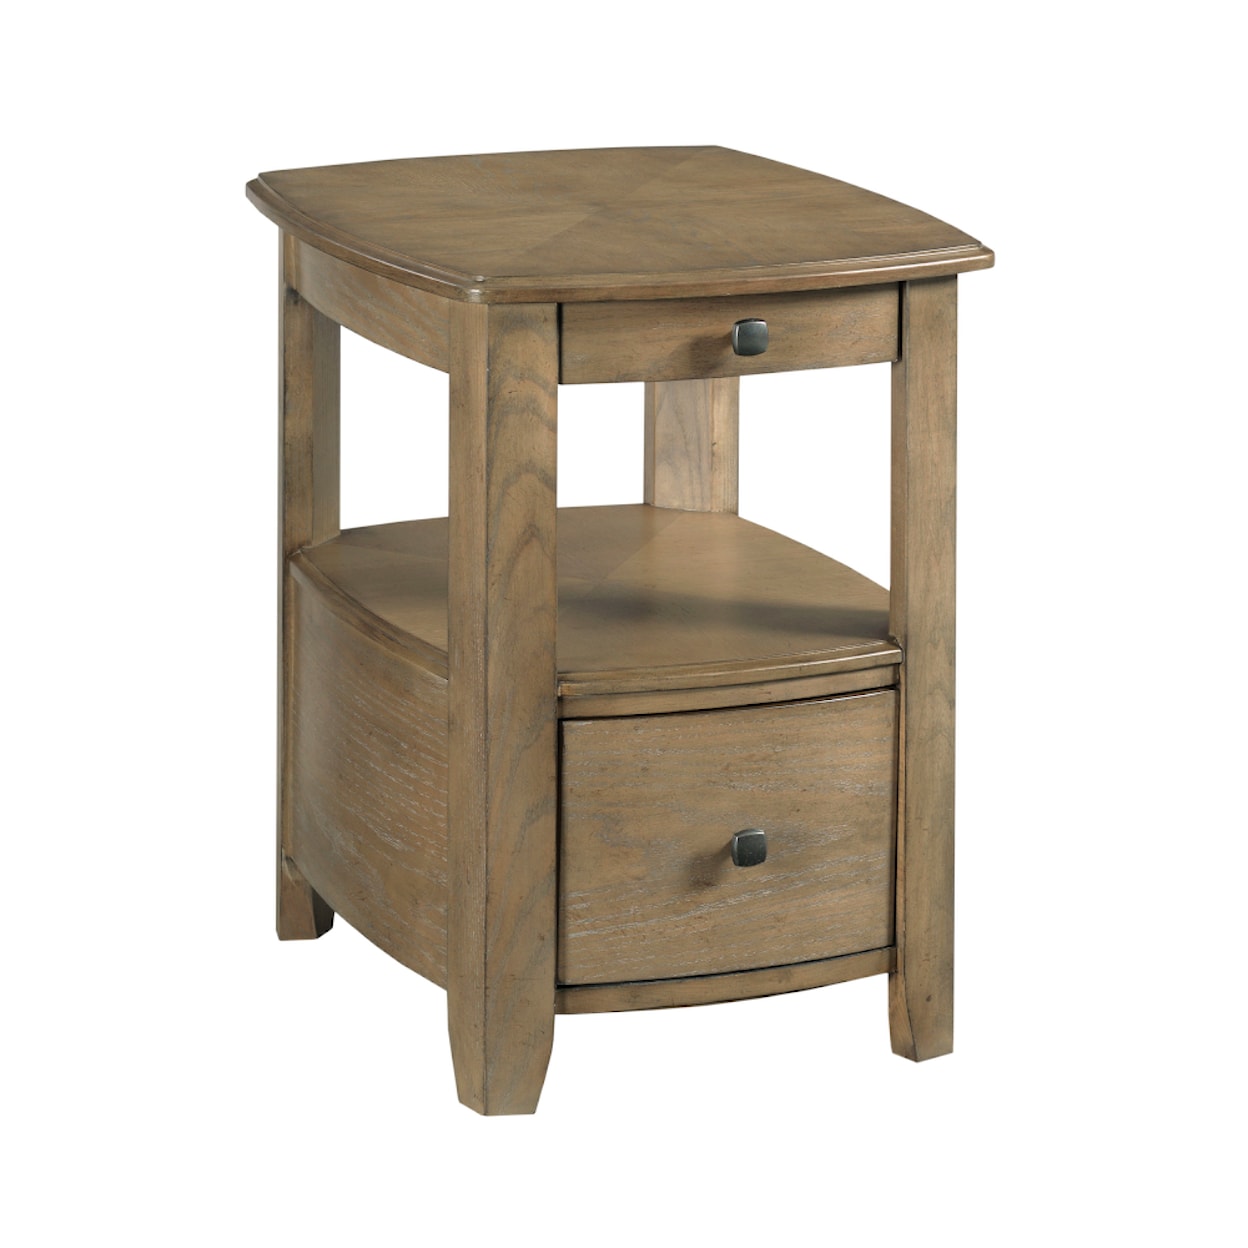 Hammary Primo III Chairside Table